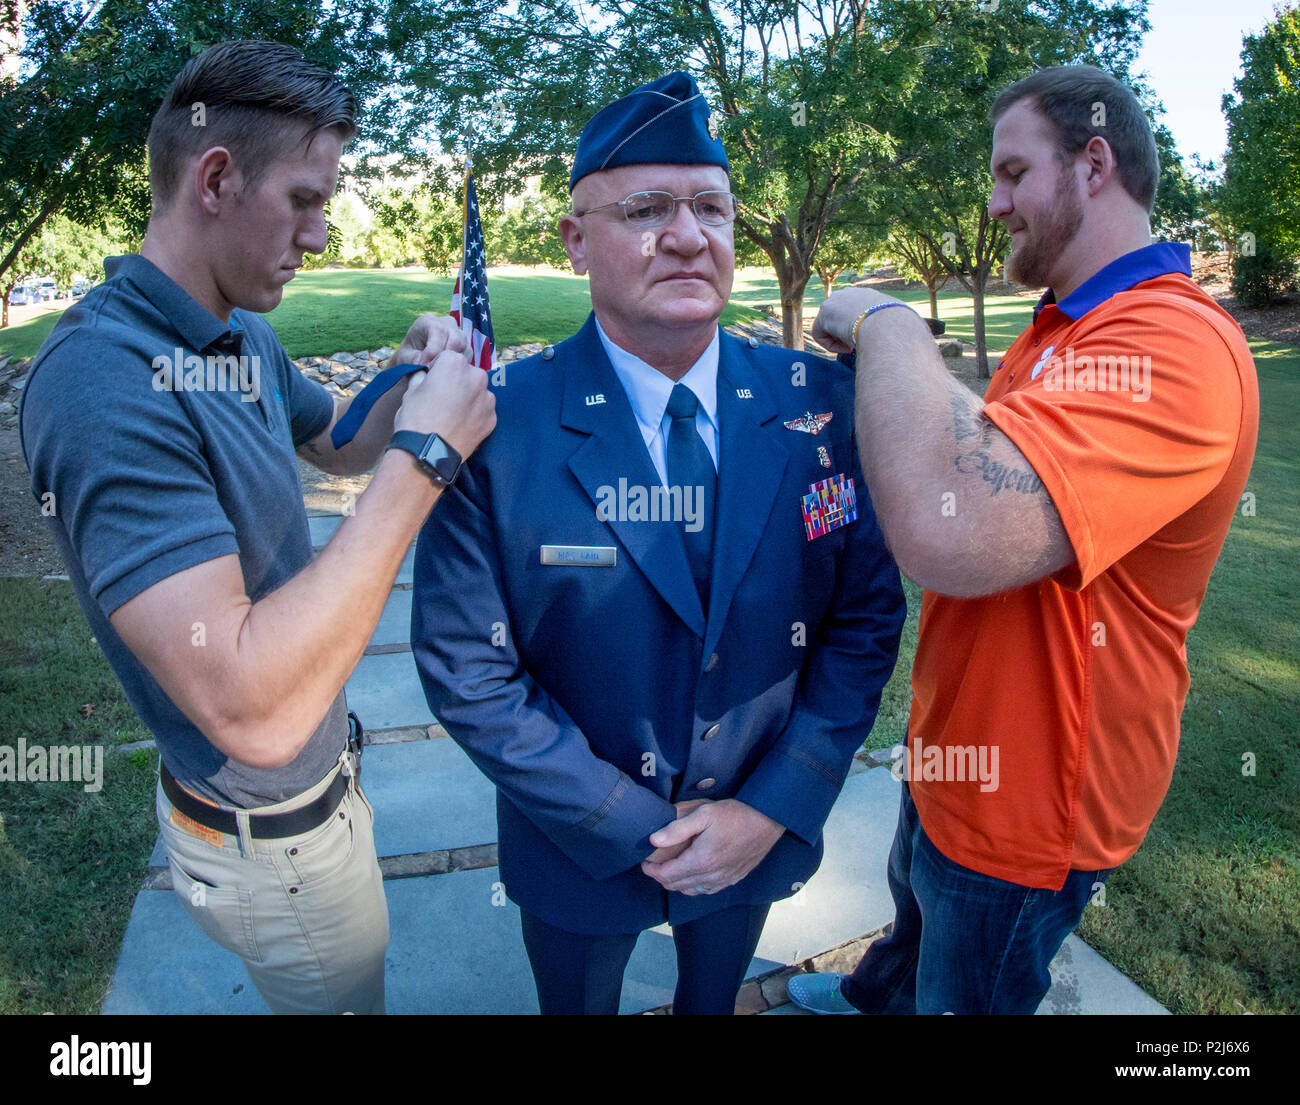 Clemson Tigers football players Sean and Eric Mac Lain pin the rank of lieutenant colonel on their father, U.S. Air Force Lt. Col. Michael E. Mac Lain, during a ceremony at the Scroll of Honor in Clemson University’s Memorial Park, Sept. 30, 2016. Mac Lain, of Lillington, N.C., is the Aeromedical Operations Flight Commander for the 43rd  Aeromedical Evacuation Squadron, Pope Army Airfield, Fort Bragg, NC. He directs daily flight operations for 60 assigned personnel, and provides medical care as a Flight Nurse on aeromedical evacuation missions. Mac Lain has deployed nine times to combat zones  Stock Photo